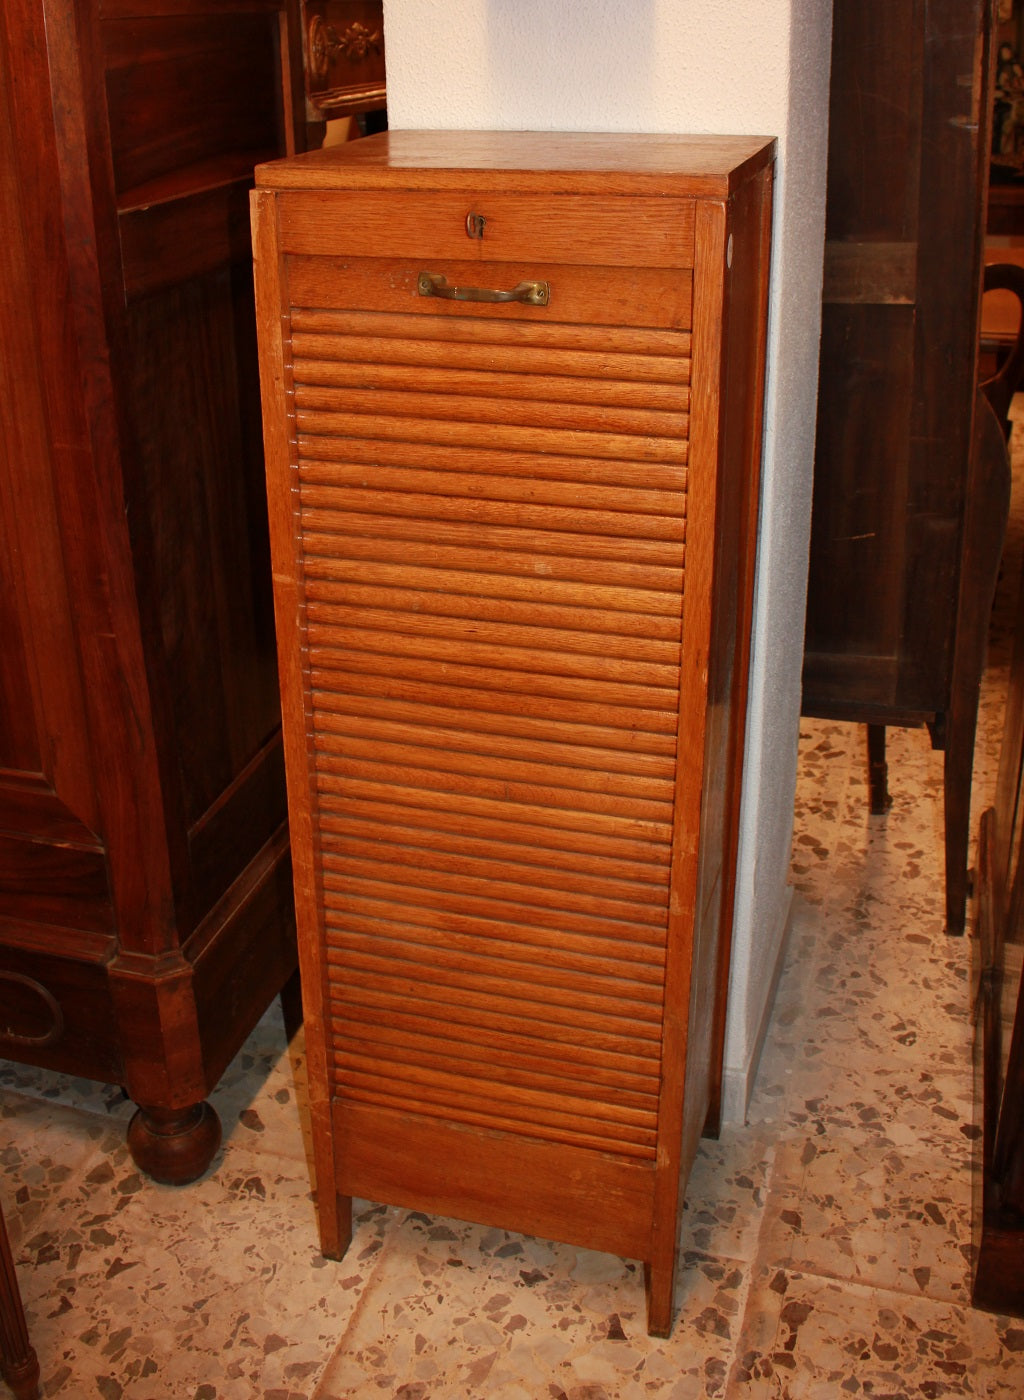 Small Office Document Cabinet with Roll-Top Early 20th Century